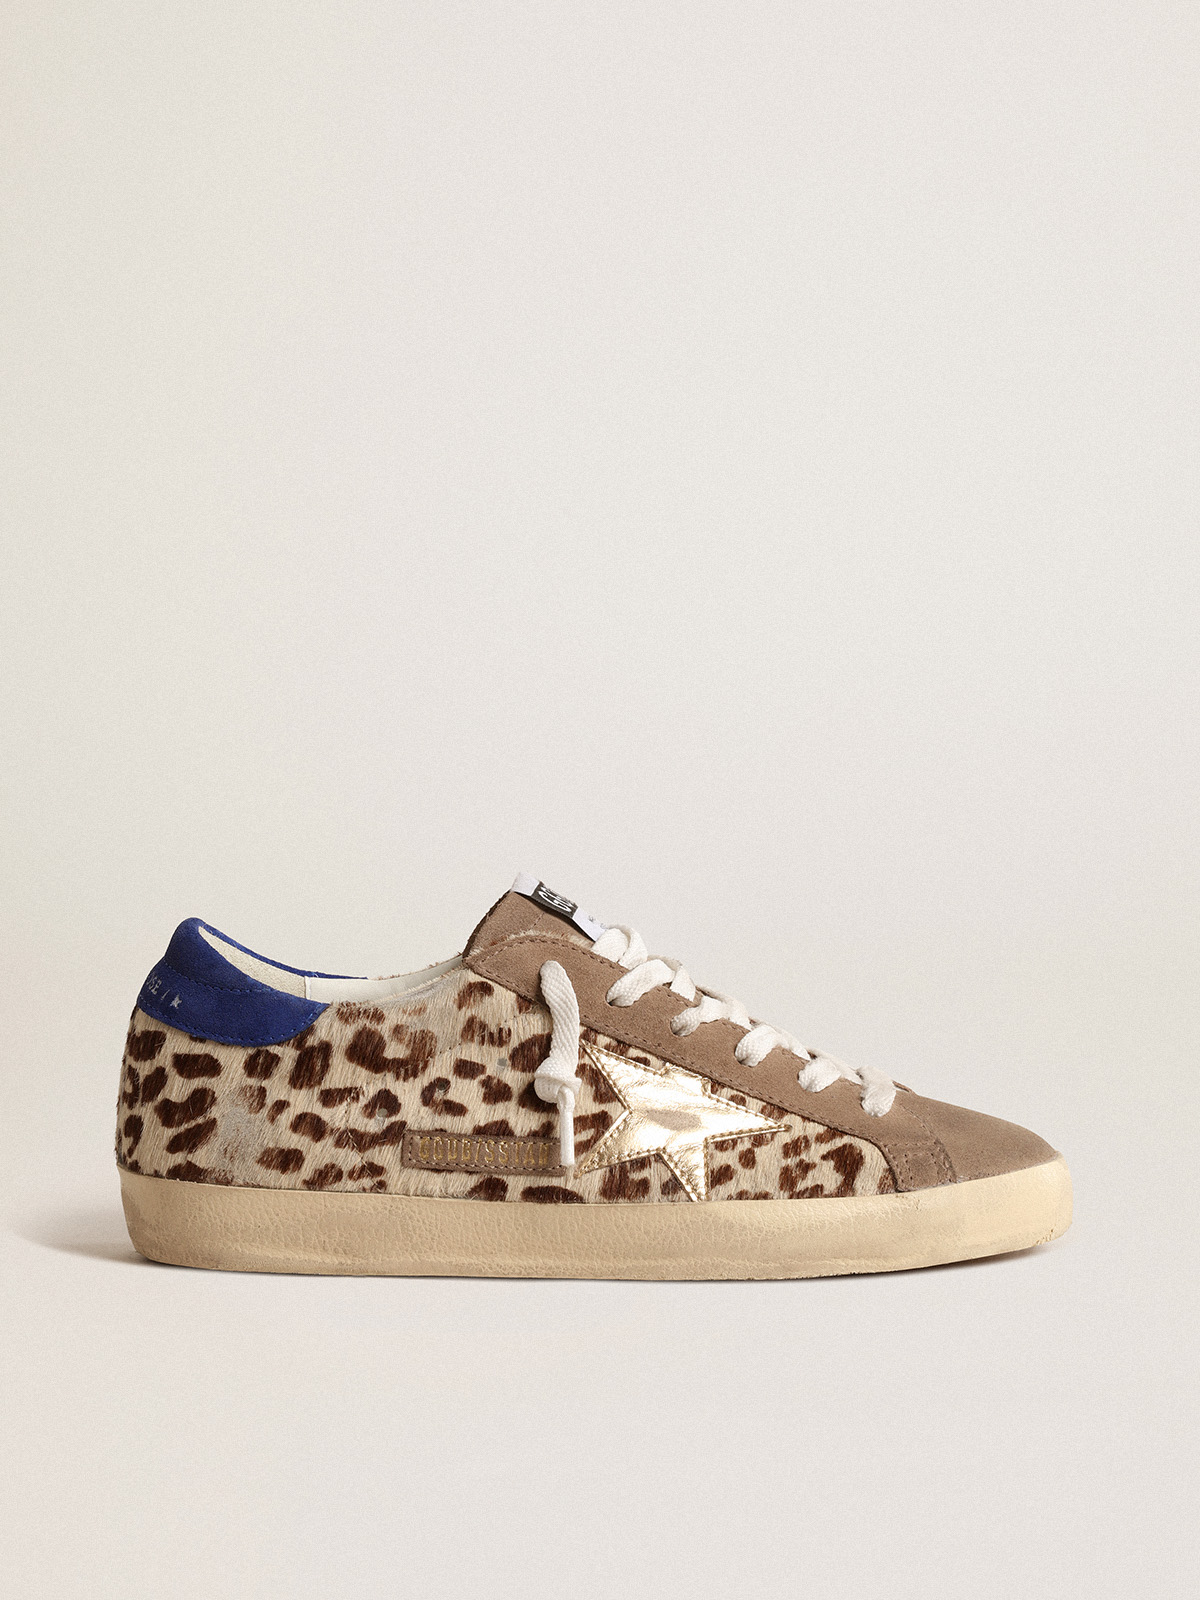 Super-Star LTD in pony skin with gold star and suede heel tab | Golden Goose